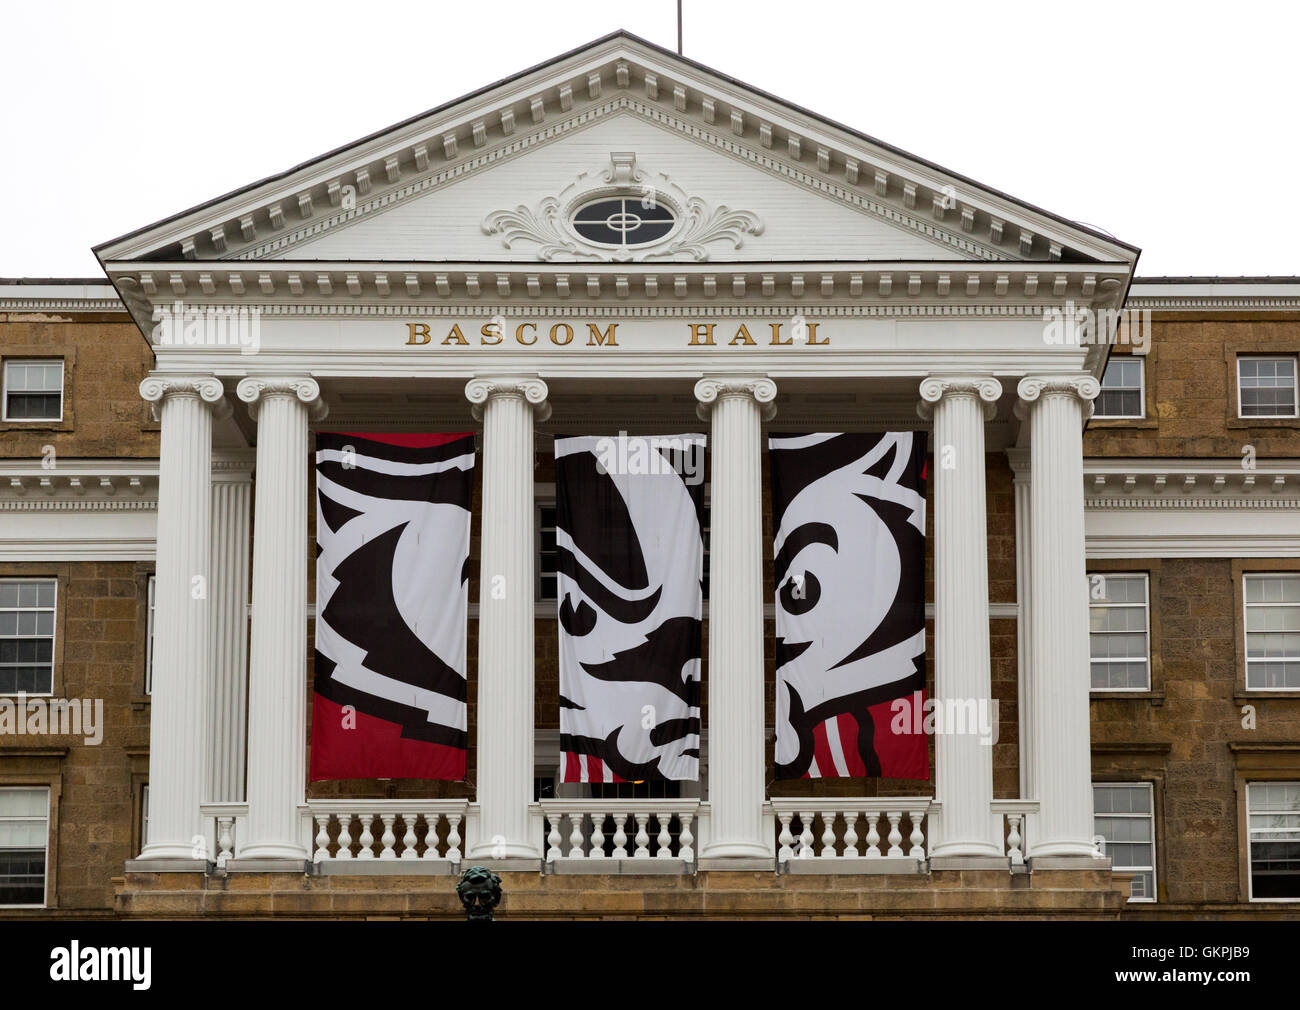 University of Wisconsin at Madison Bascom Hall with the school badger mascot displayed on three banners Stock Photo